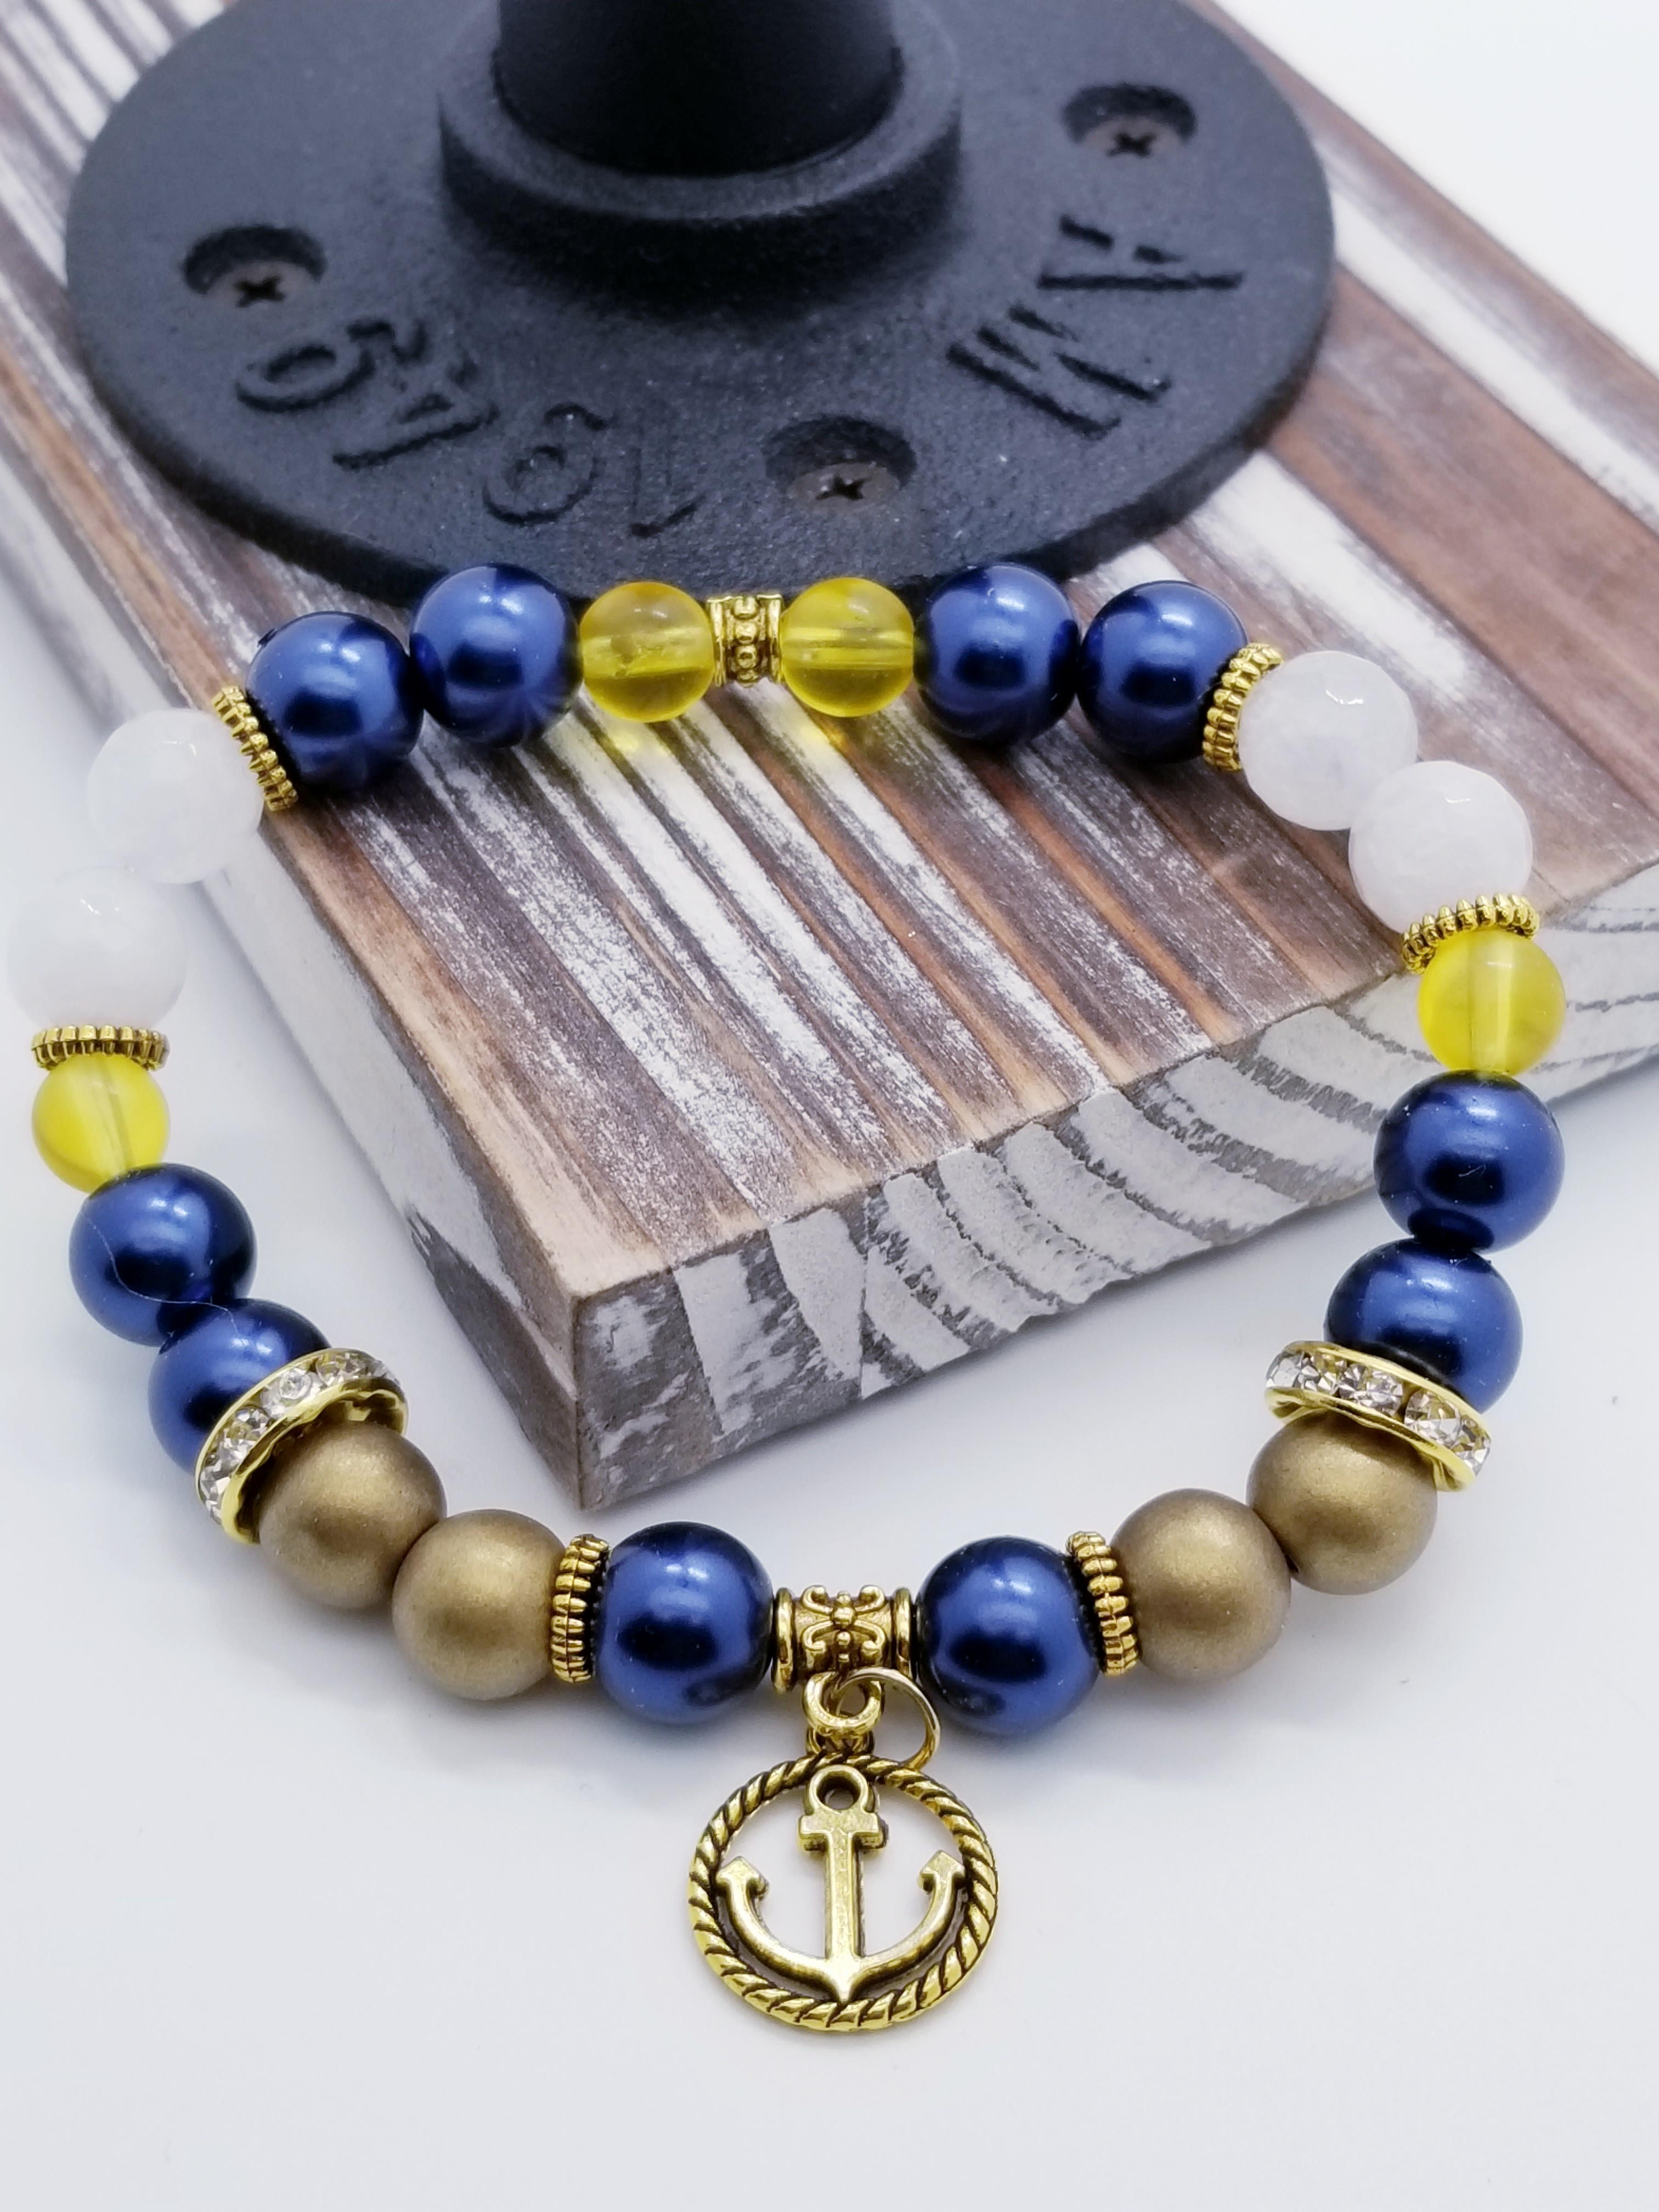 Honor, Courage, and Commitment (US Navy core values) inspired bracelet to honor our troops, veterans, and the families that support them! Anchor charm with white turquoise beads, navy metallic beads, yellow glass beads, gold faceted spacer beads, grade A rondel (gold and white rhinestones), and gold spacers. 